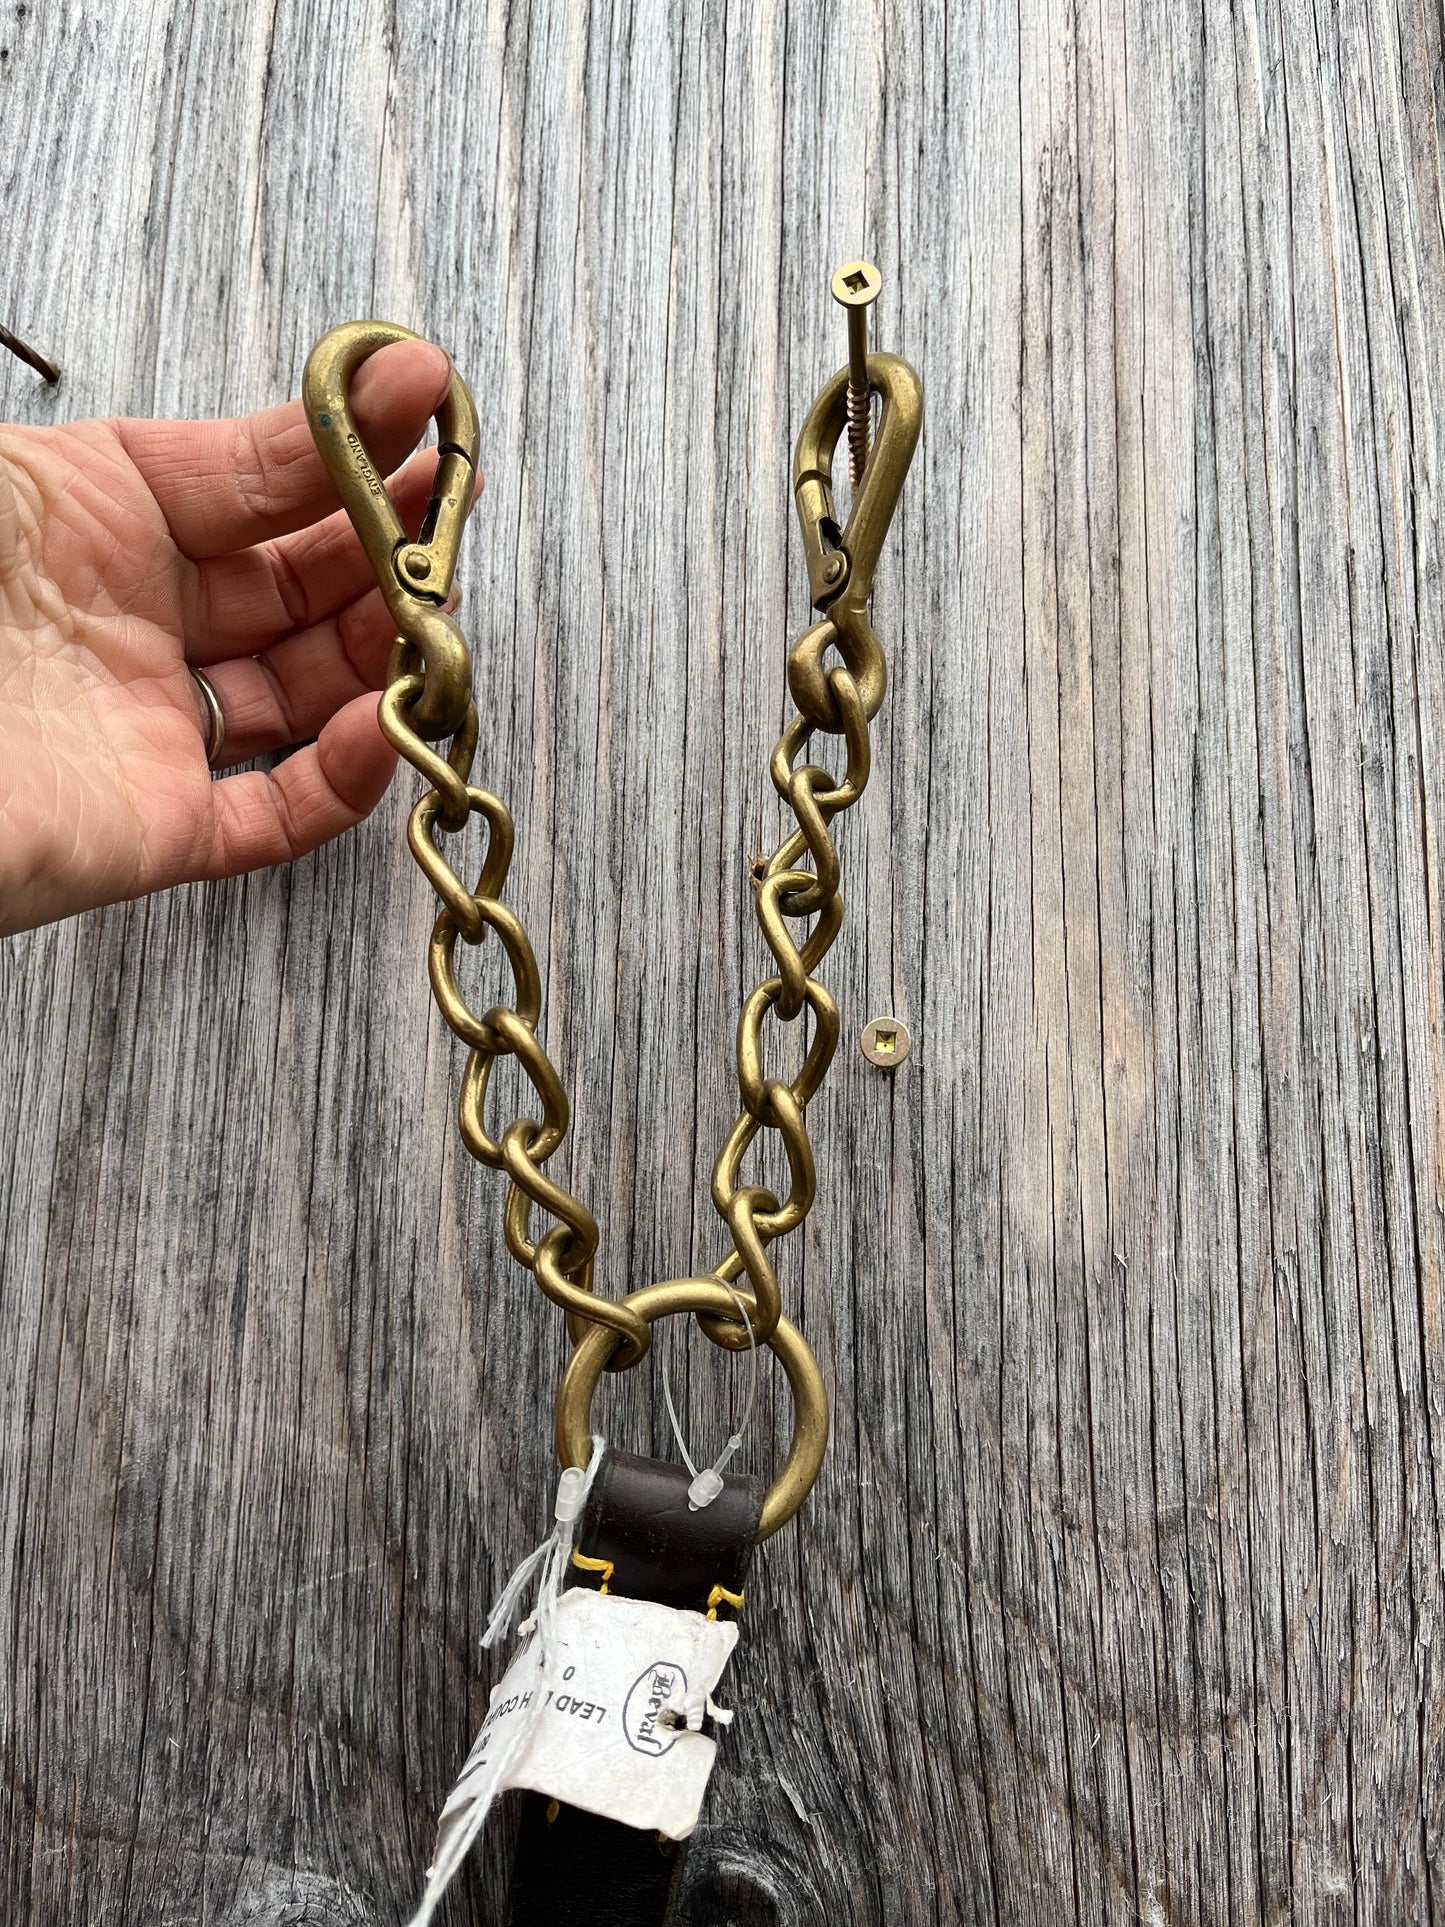 Beval split chain leather lead with brass chains new with tags